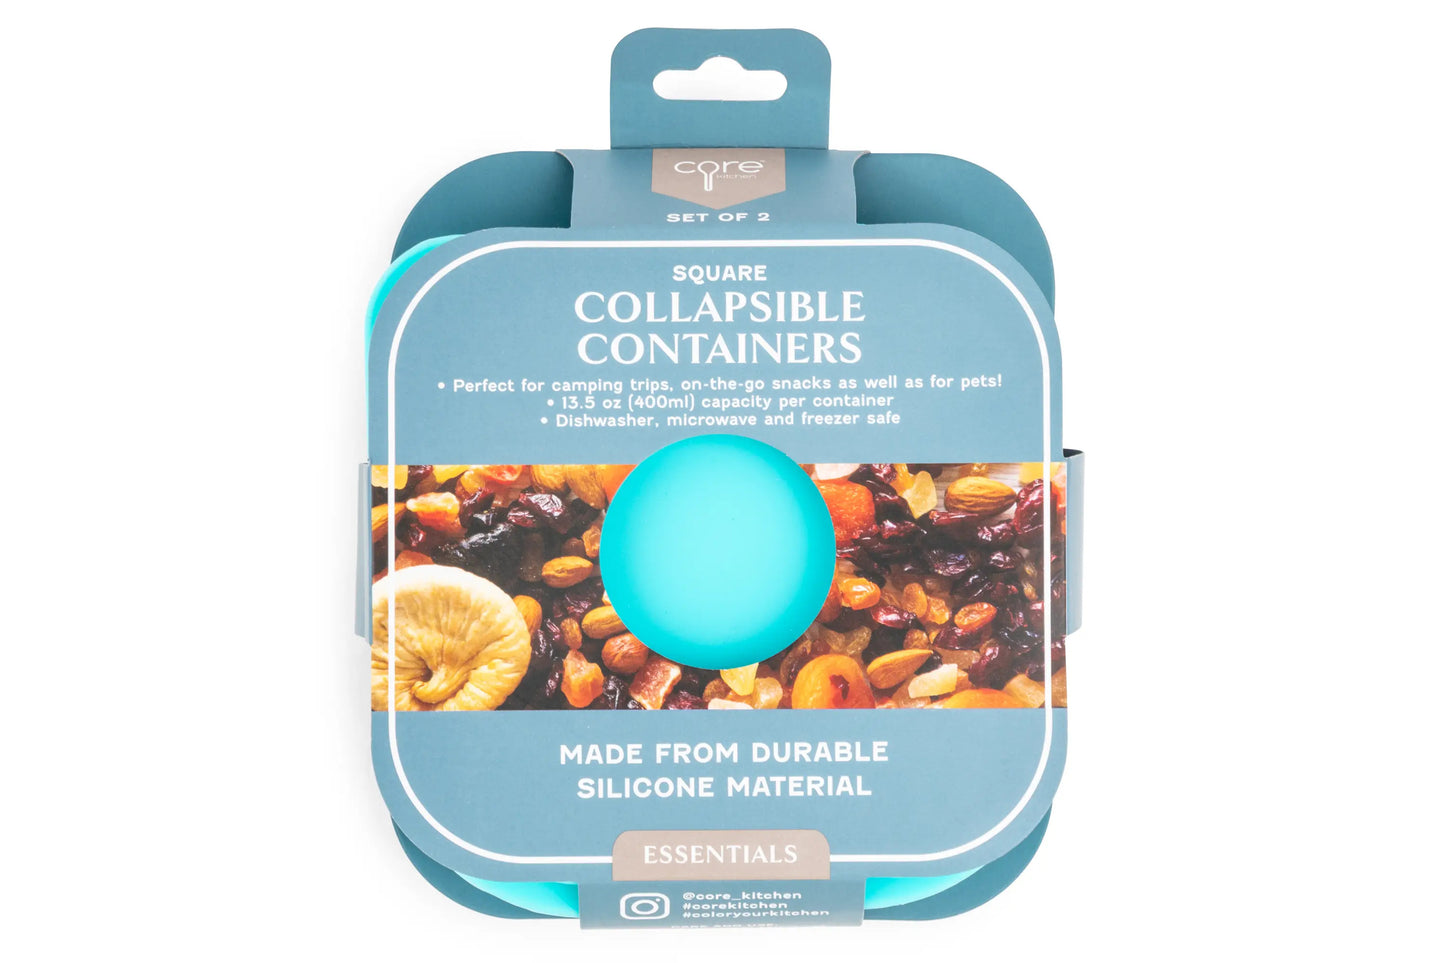 Square Collapsible Food Containers- 13.5oz